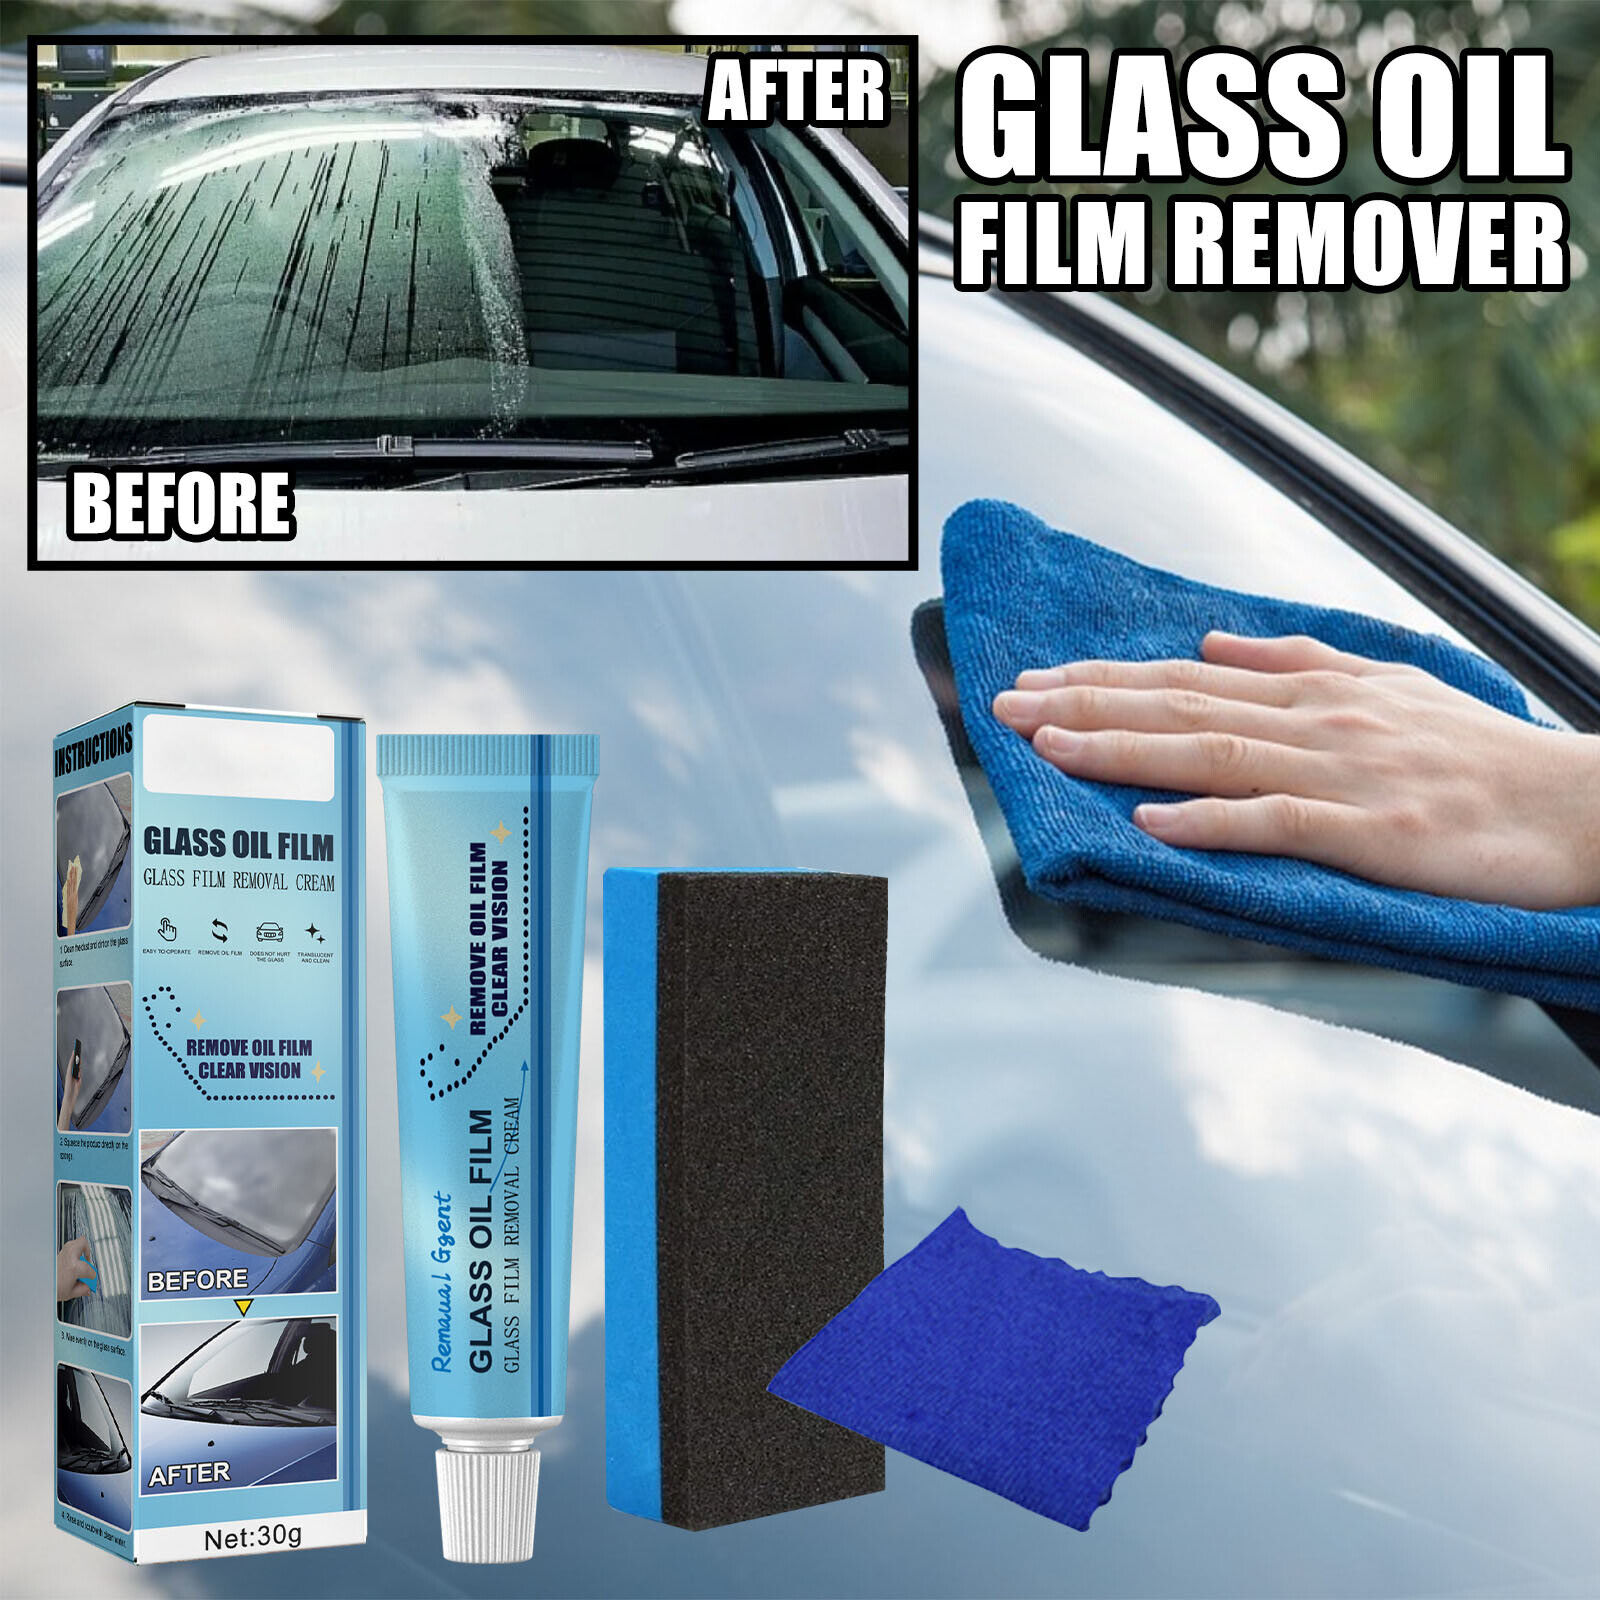 Car Glass Oil Film Cleaner And Long Term Glass Oil Film Removing Paste Glass